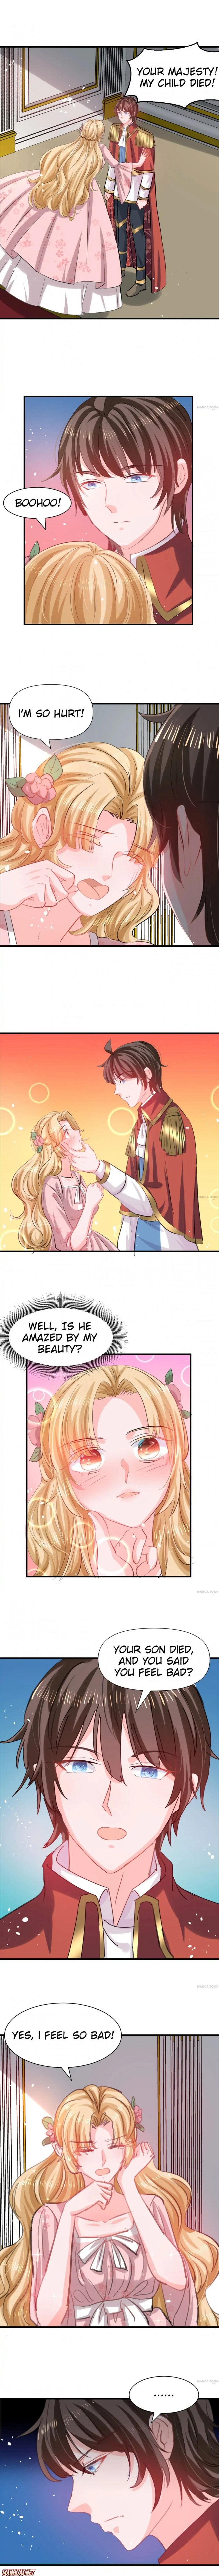 The Princess Arrives! - Page 1